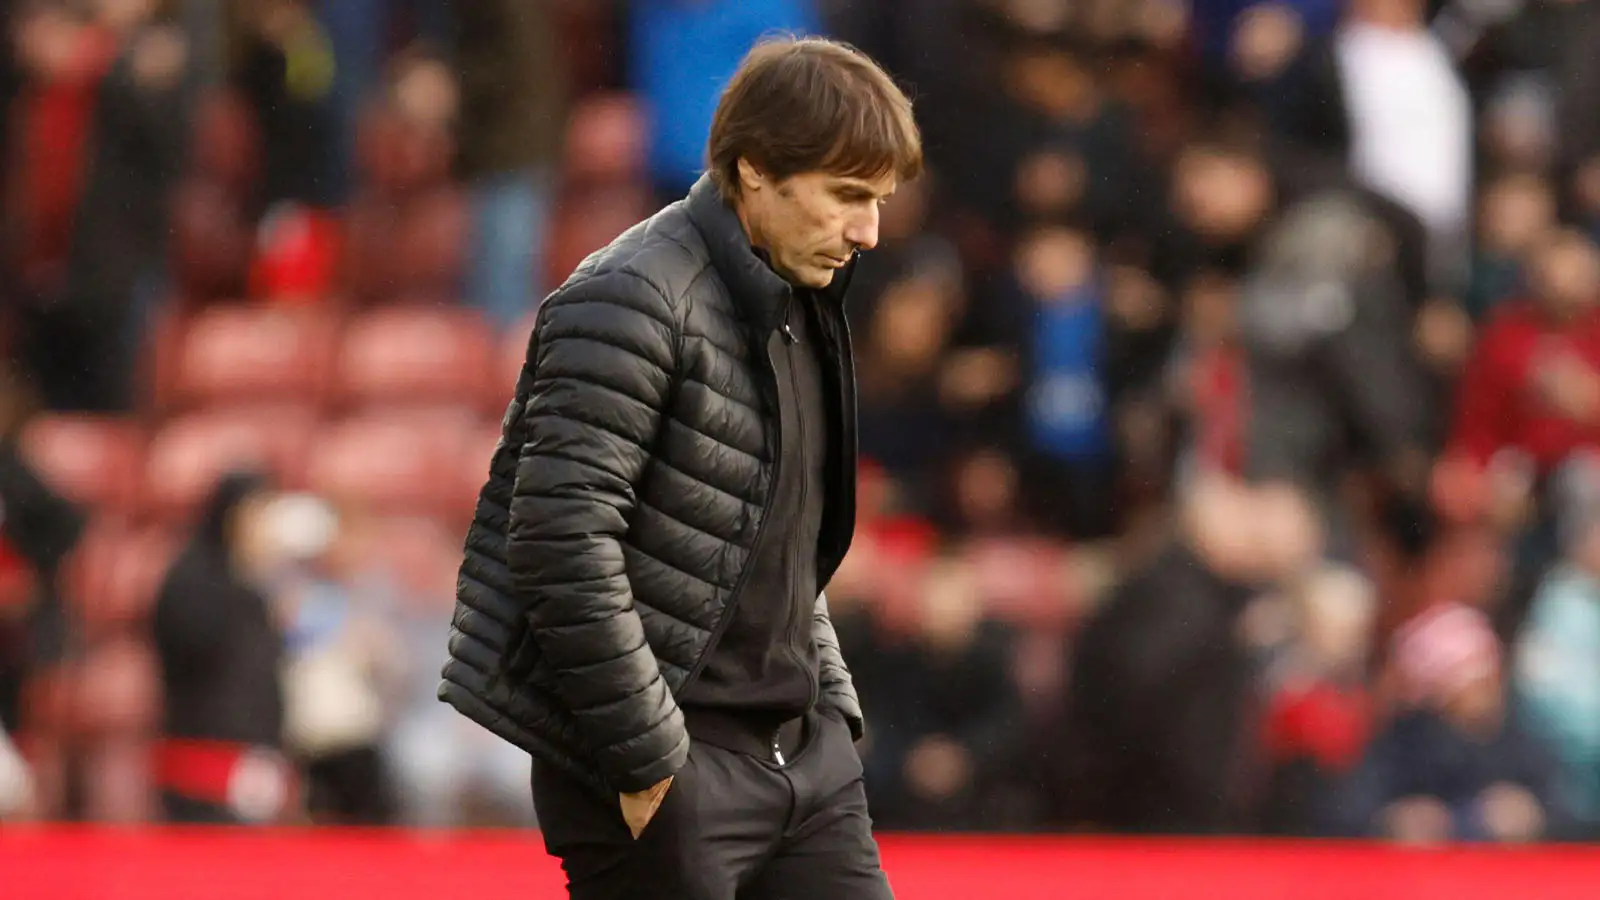 Tottenham's head coach Antonio Conte leaves the field at the end of the English Premier League soccer match between Southampton and Tottenham at St Mary's Stadium in Southampton, England, Saturday, March 18, 2023